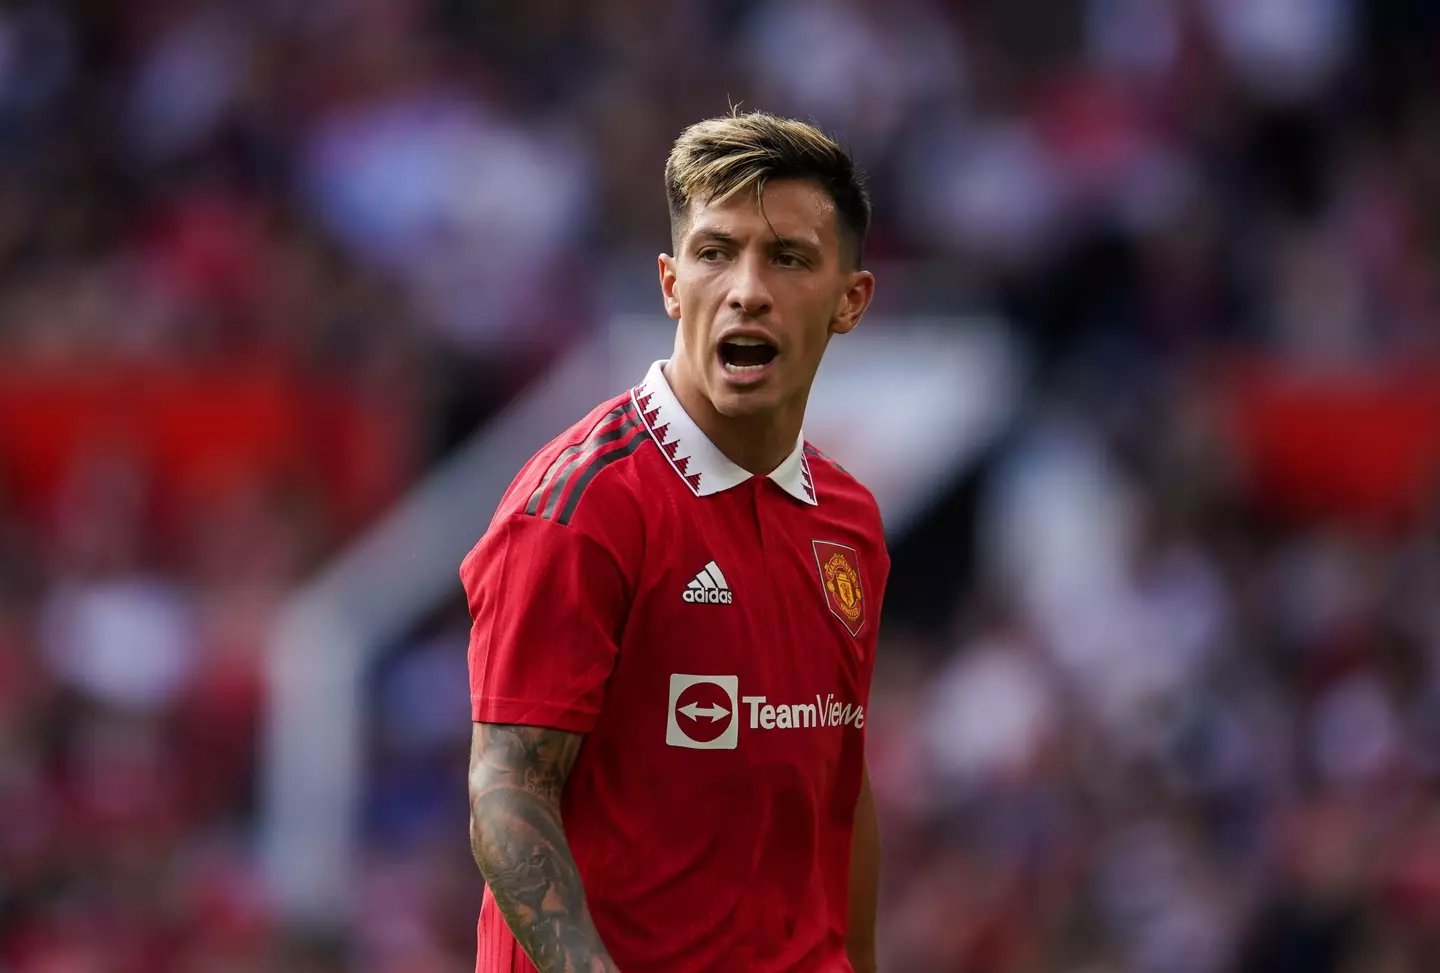 Lisandro Martinez is one of several new arrivals at United this summer (Image: Alamy)